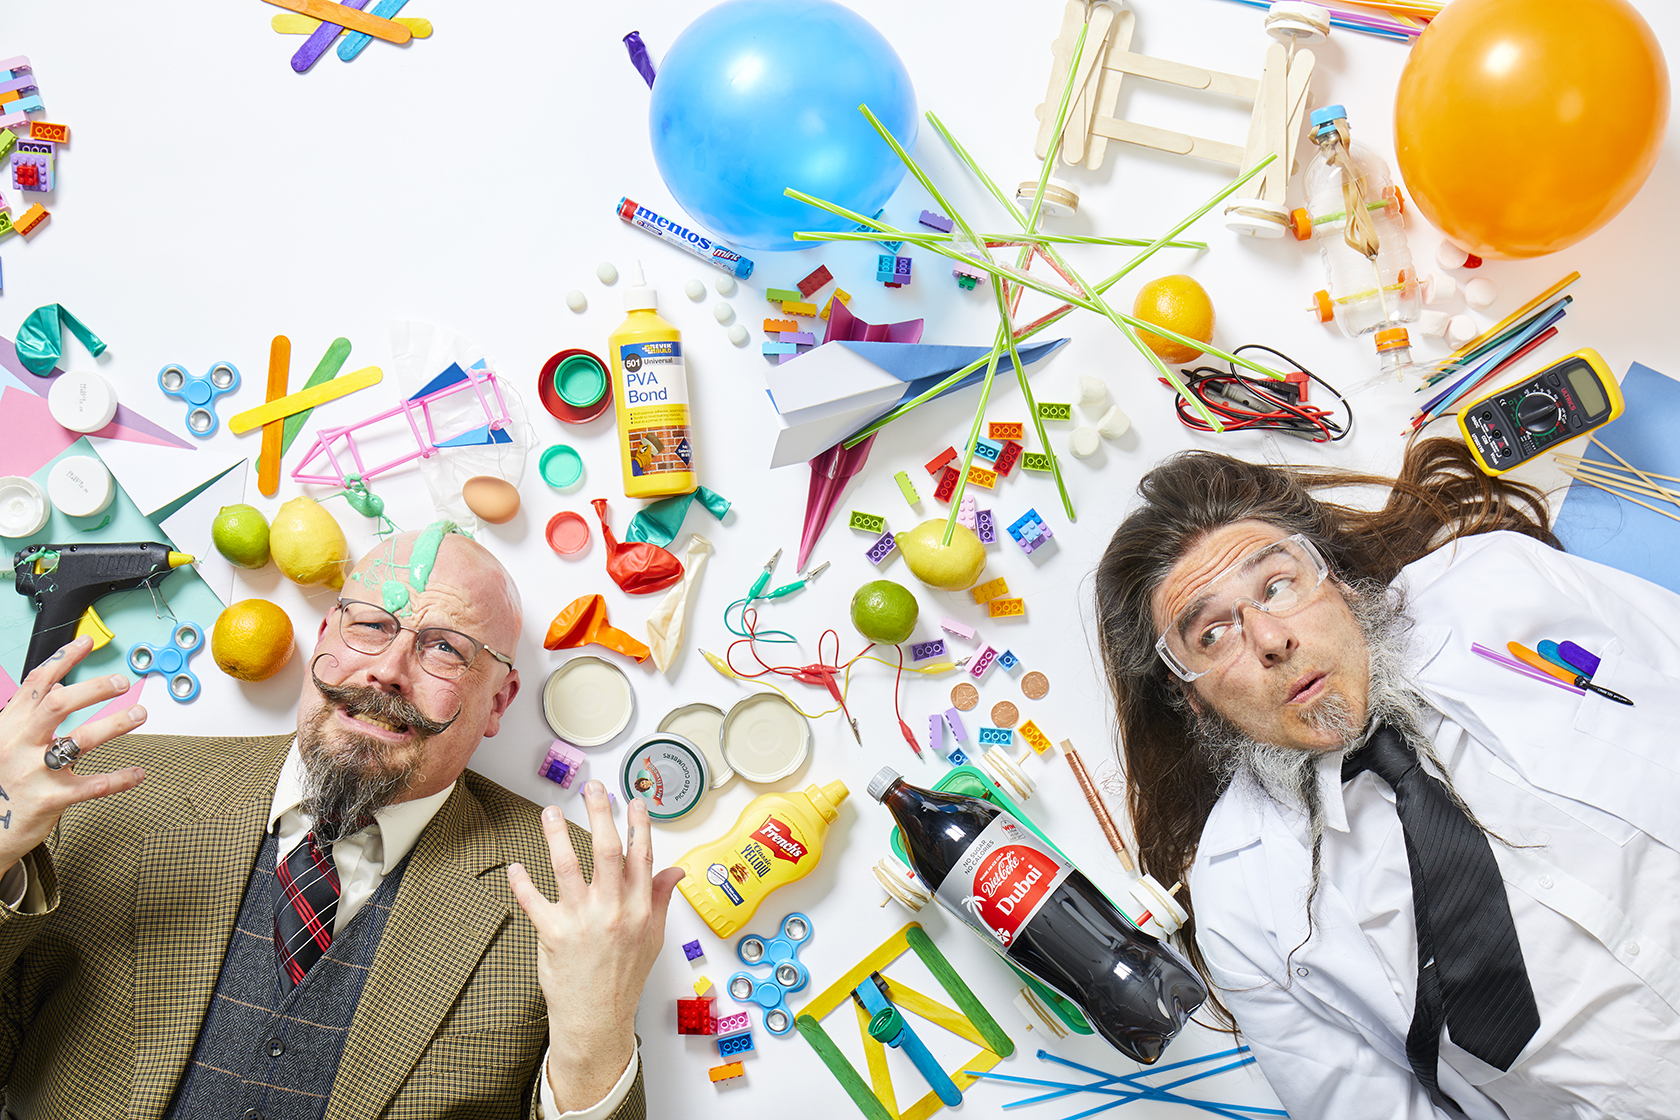 Orbax (left) and Pepper (right) laying on the ground surrounded by science experiment equipment and craft supplies.